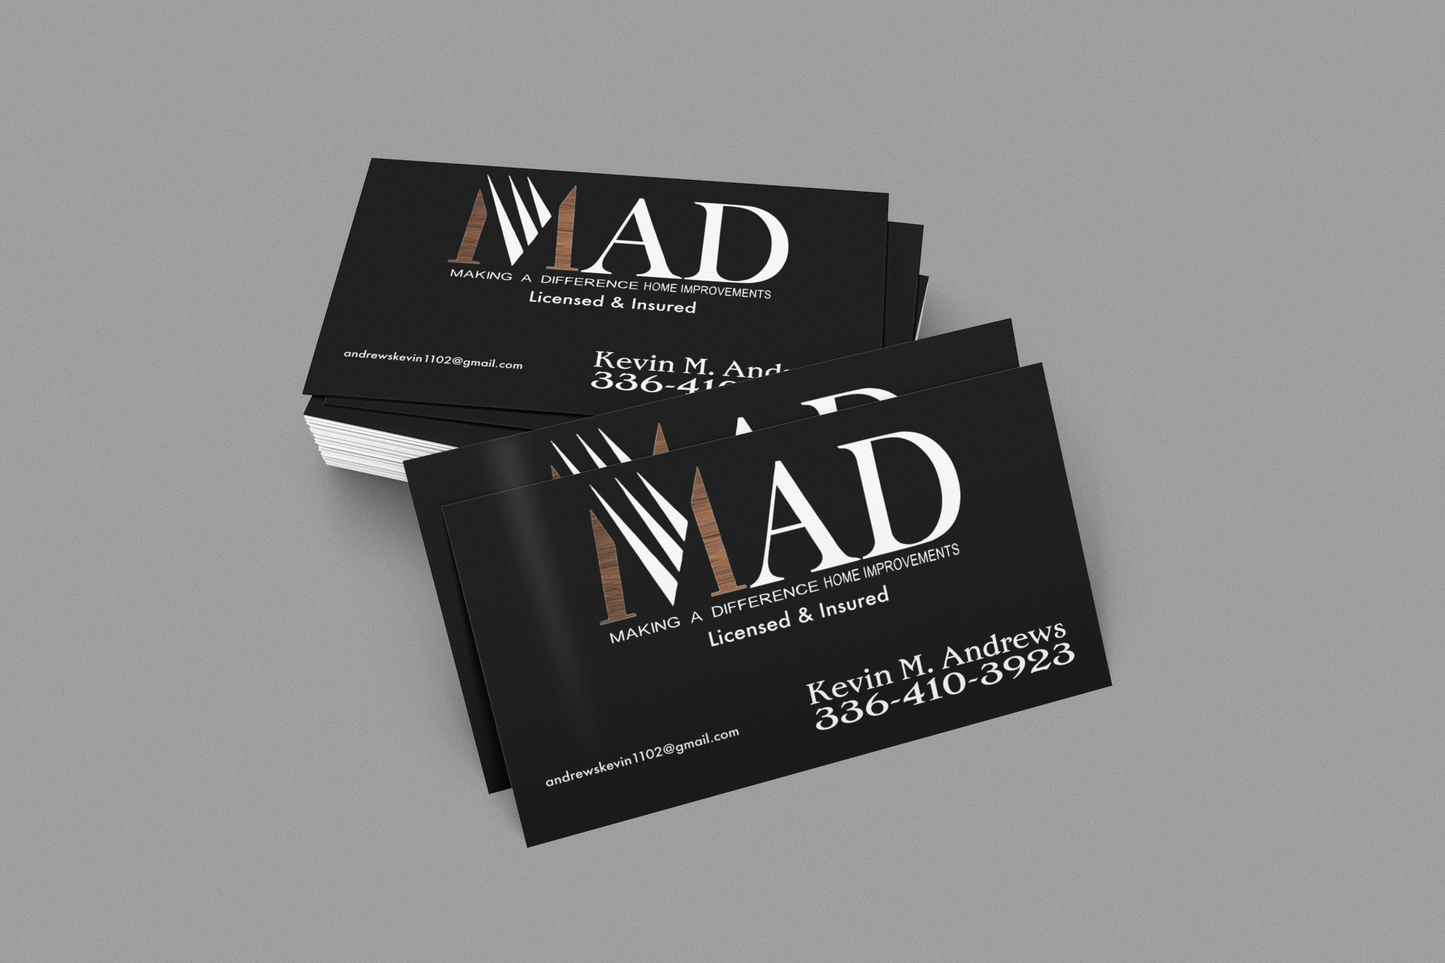 Business Cards (1000 Business Cards)